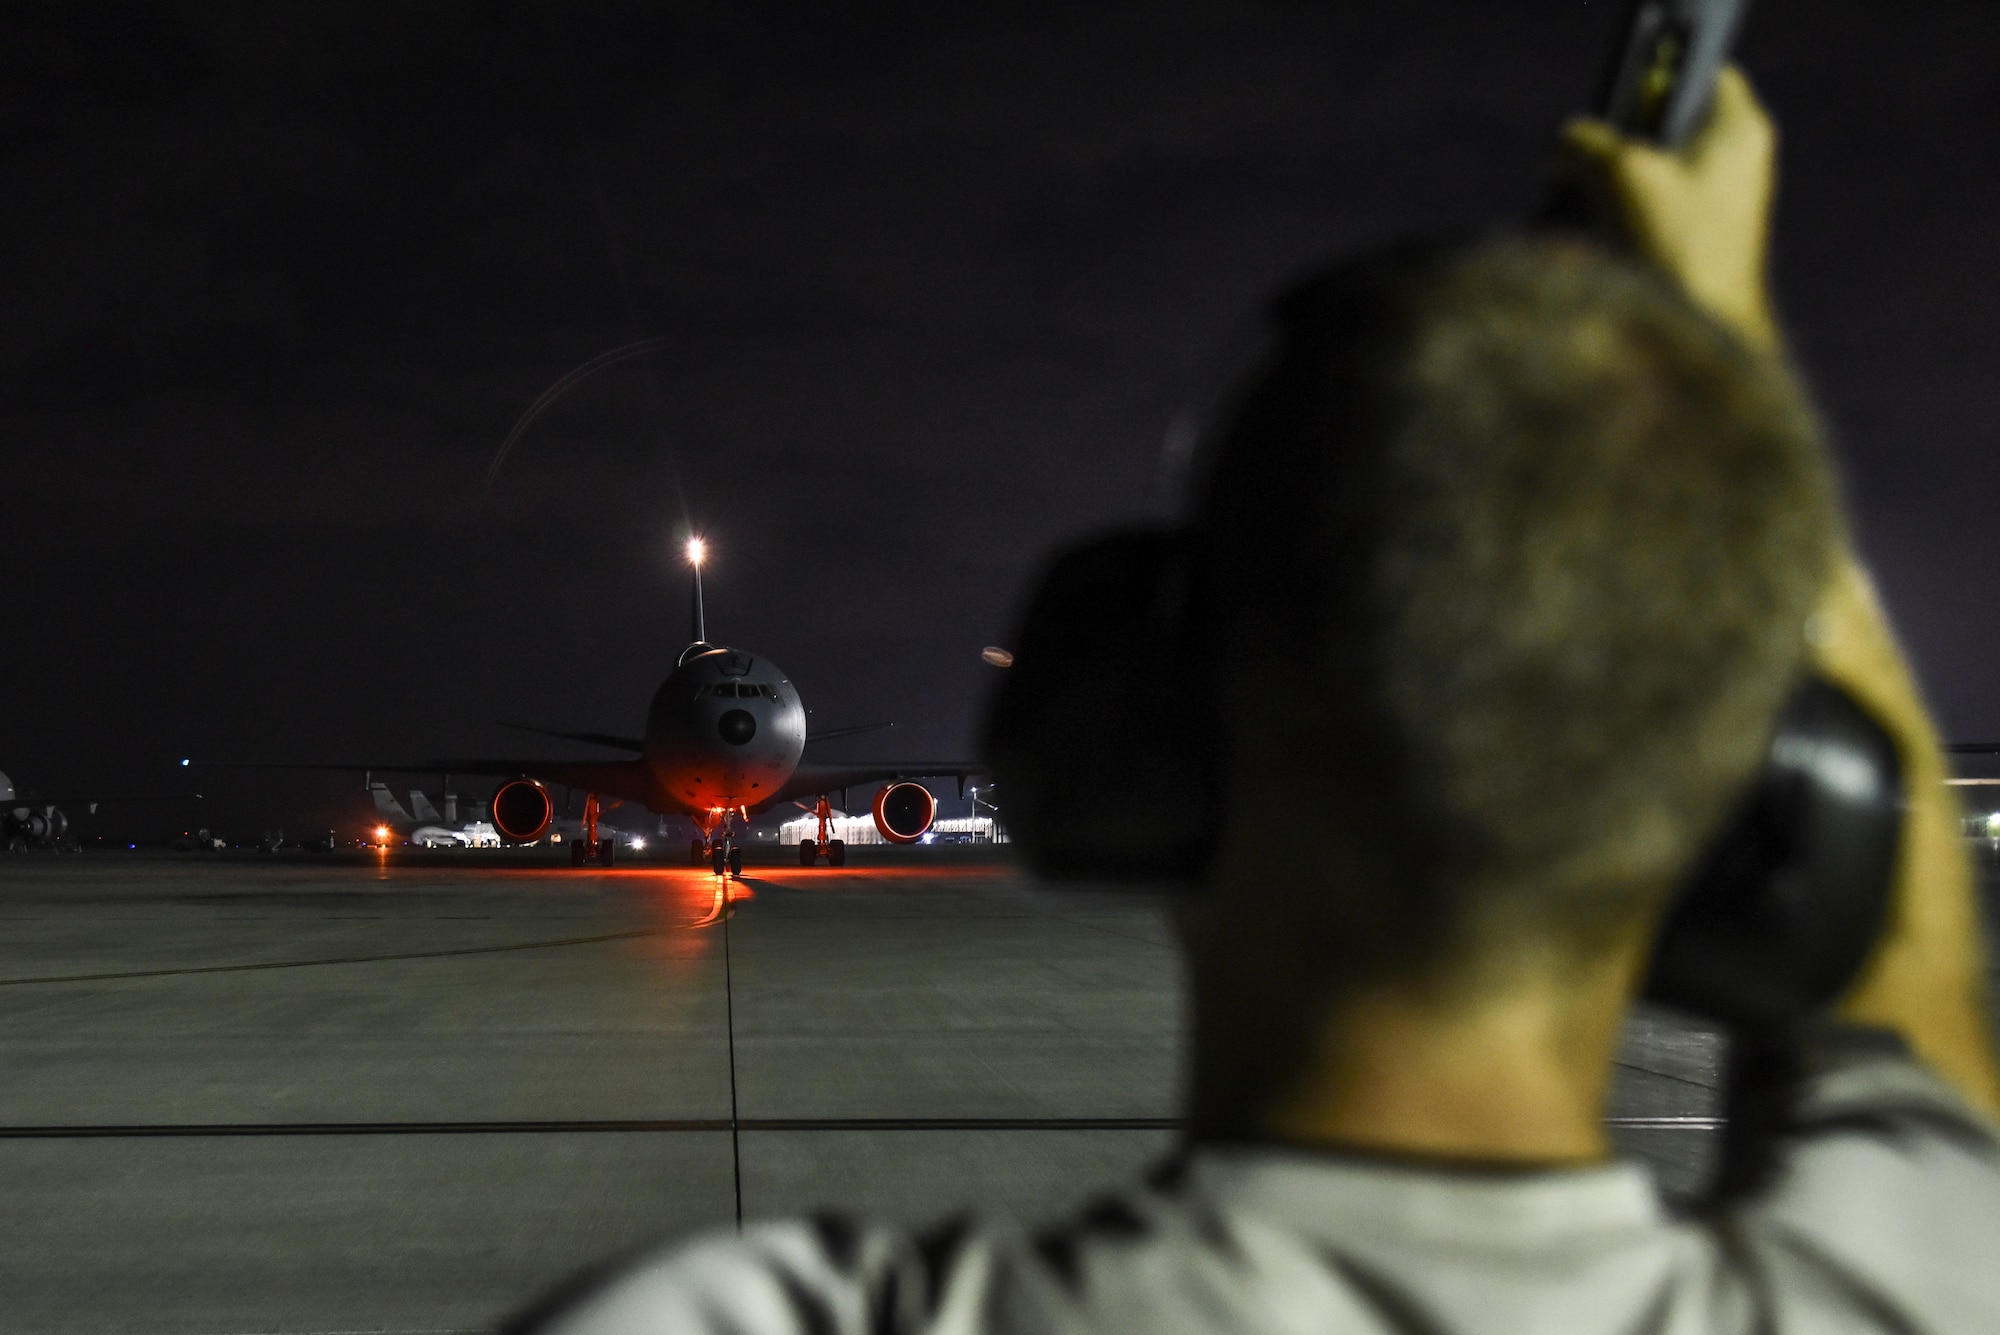 U.S. Air Force Senior Airman Chase Doyen, 380th Expeditionary Aircraft Maintenance Squadron KC-10 Extender crew chief, marshalls a KC-10 upon landing at Al Dhafra Air Base, United Arab Emirates, Dec. 18, 2018. The crew chief’s extensive list of responsibilities including for pre-, post- and thru-flight checks, and well as various inspections, allows them to fully understand their vital role, making them jacks-of-all-trades when it comes to repairing the aircraft. (U.S. Air Force photo by Senior Airman Mya M. Crosby)